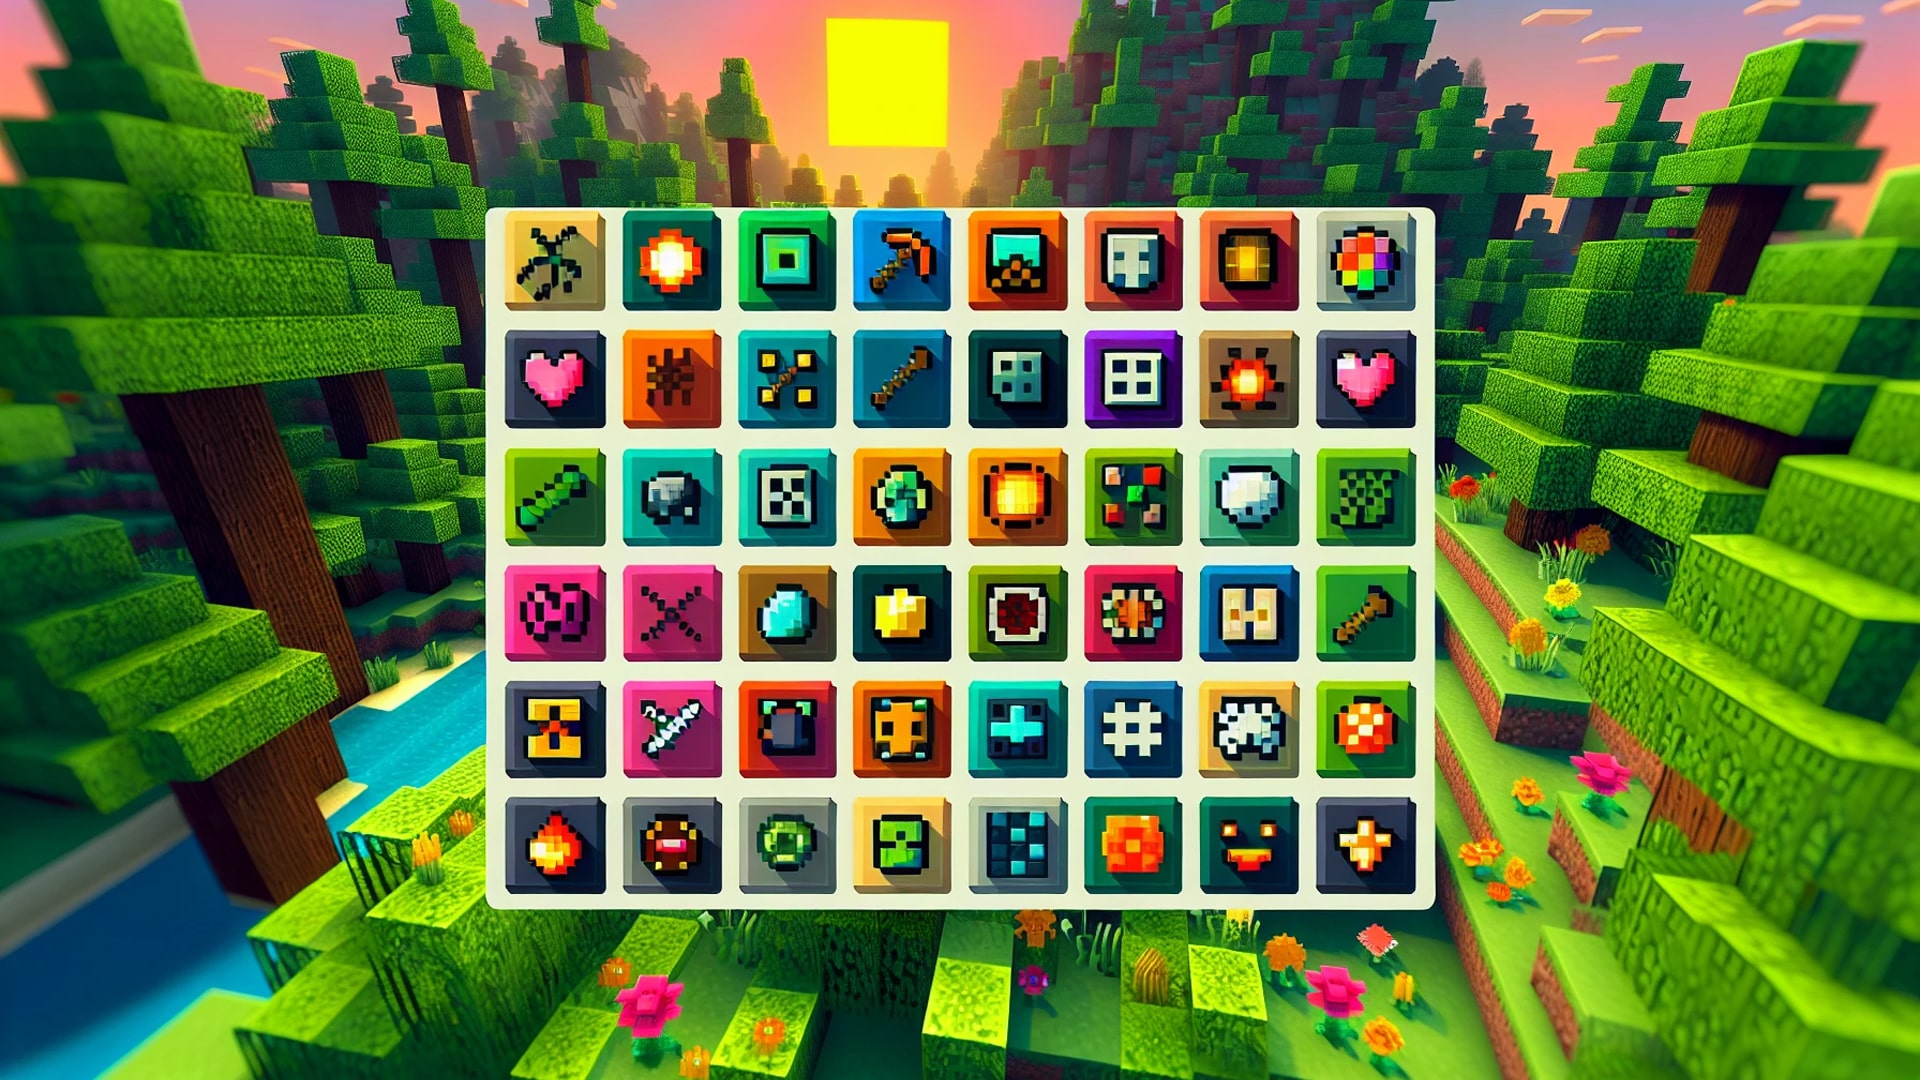 Colorful resource packs icons for Minecraft